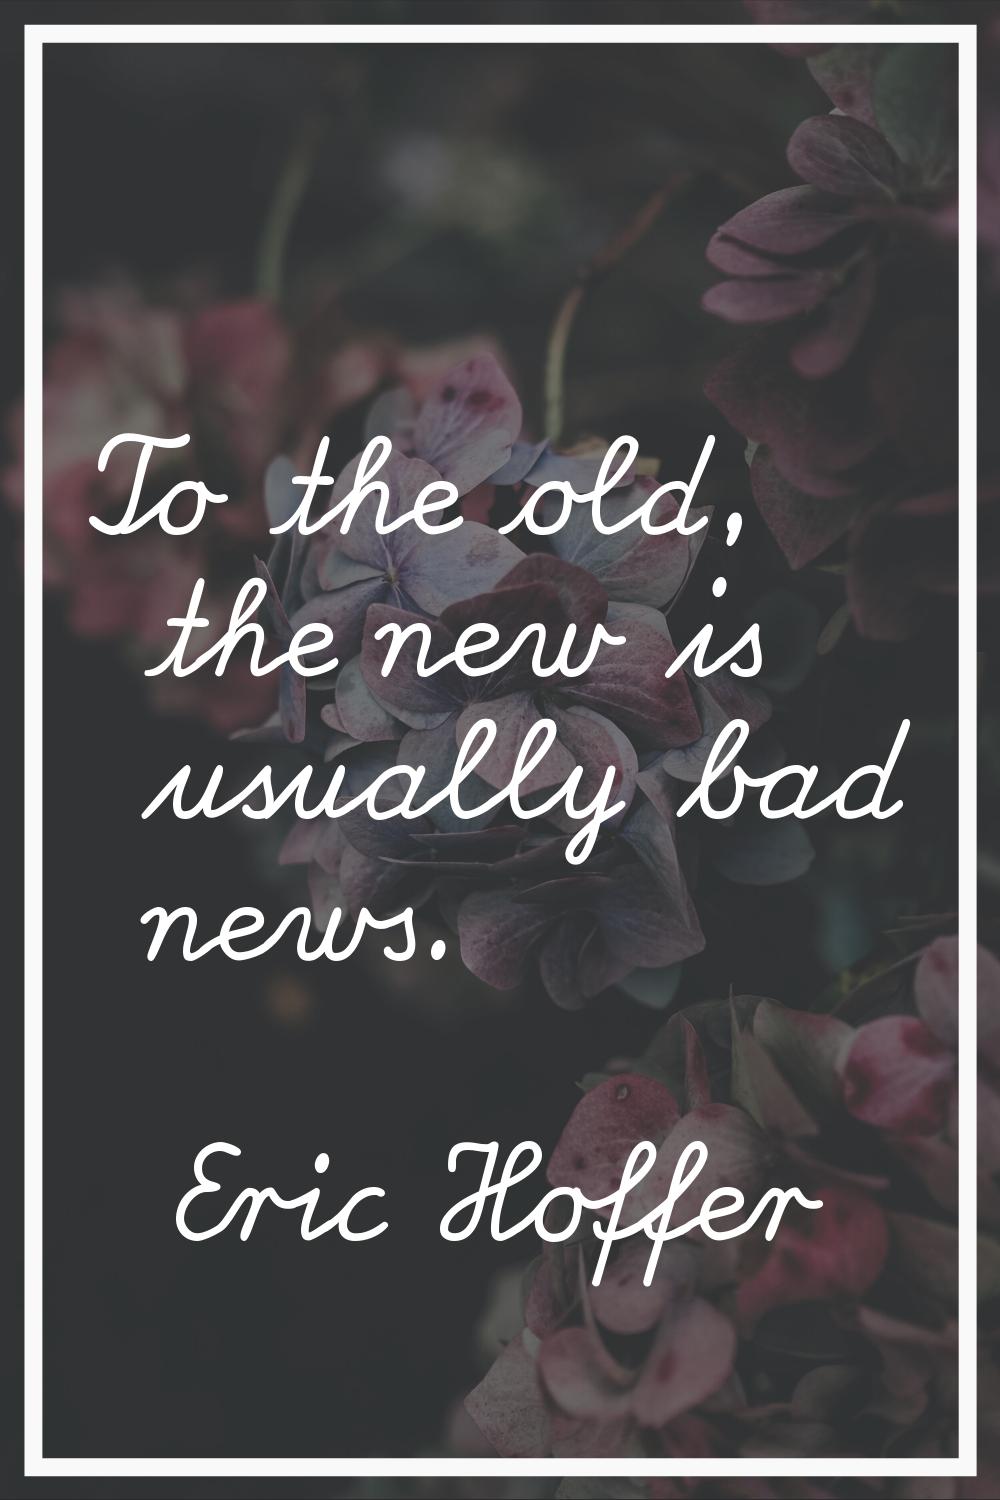 To the old, the new is usually bad news.